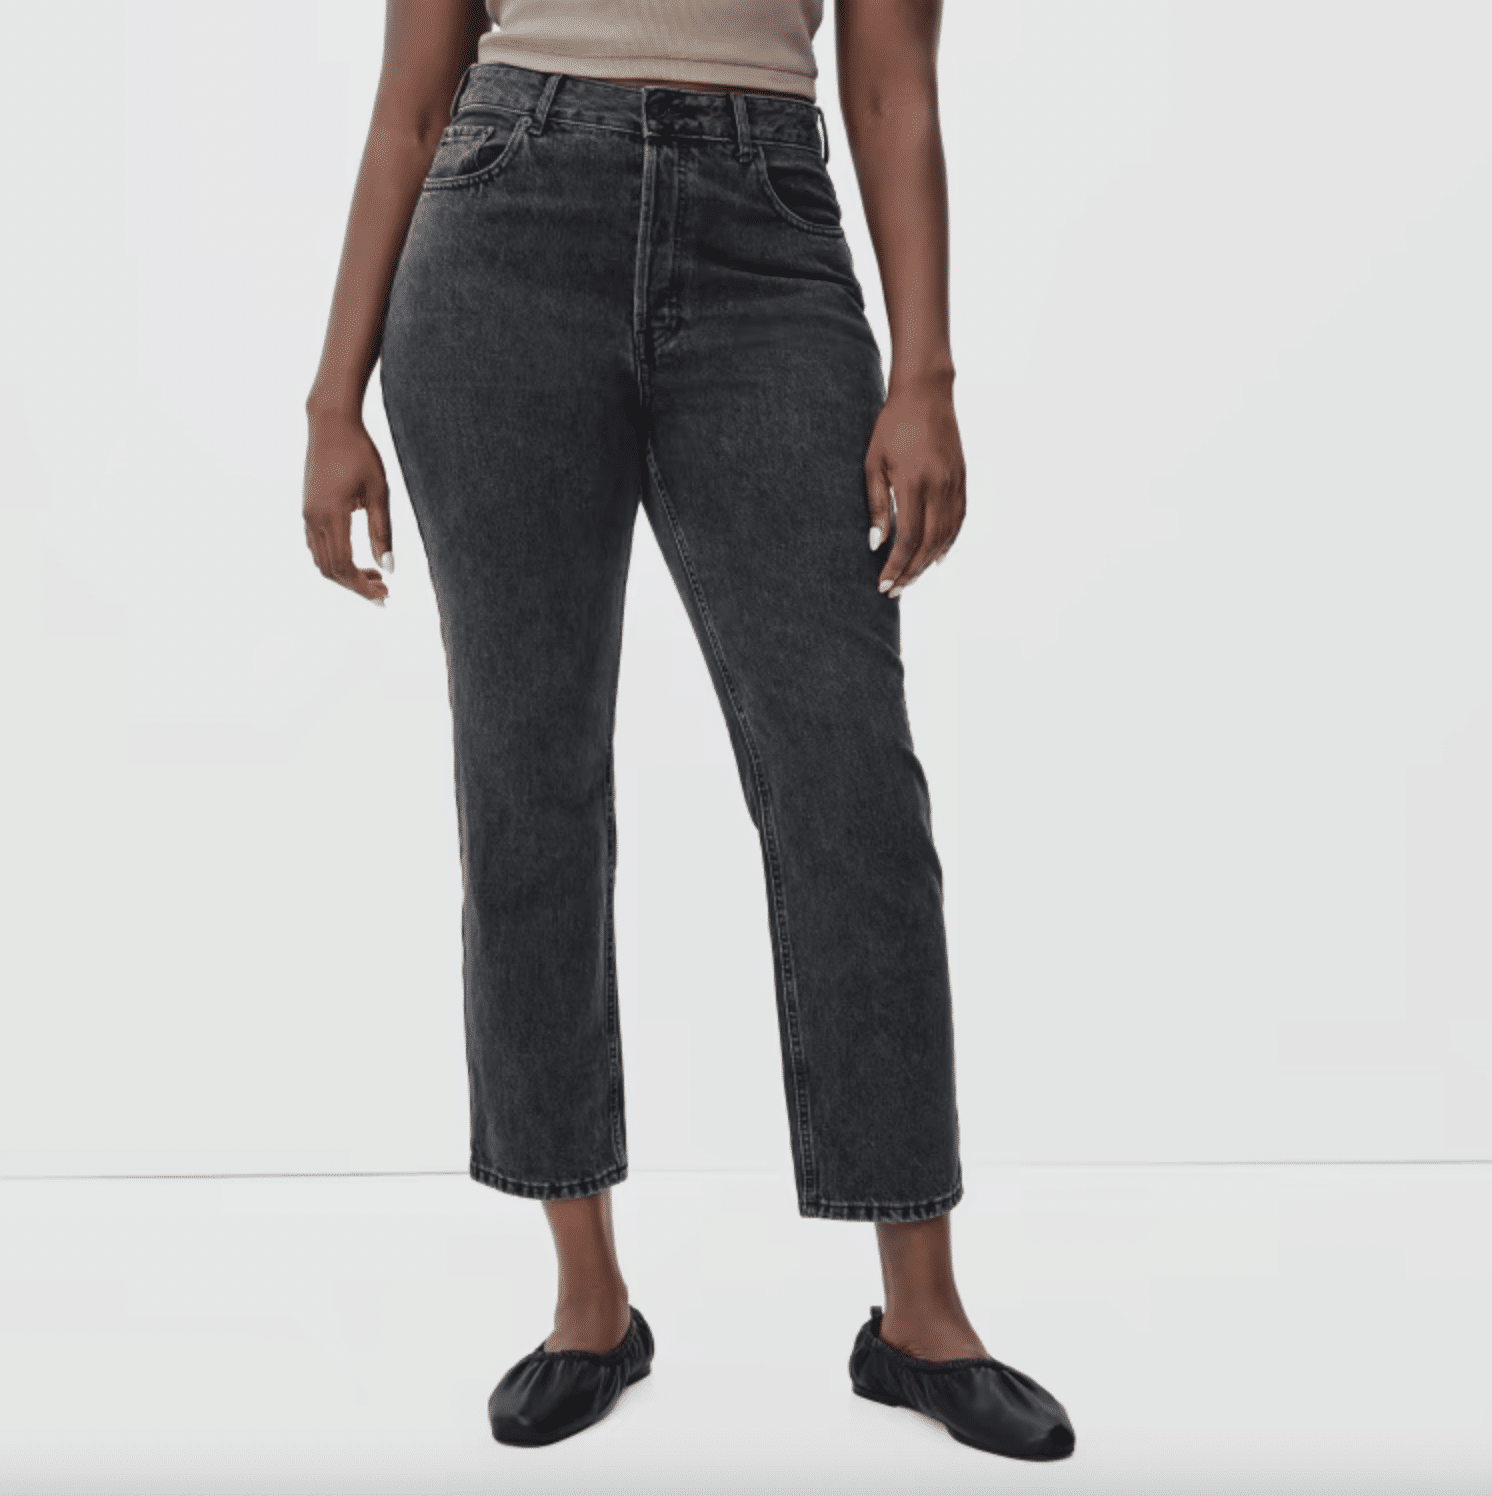 An Honest Everlane Denim Review (Know Before You Buy)